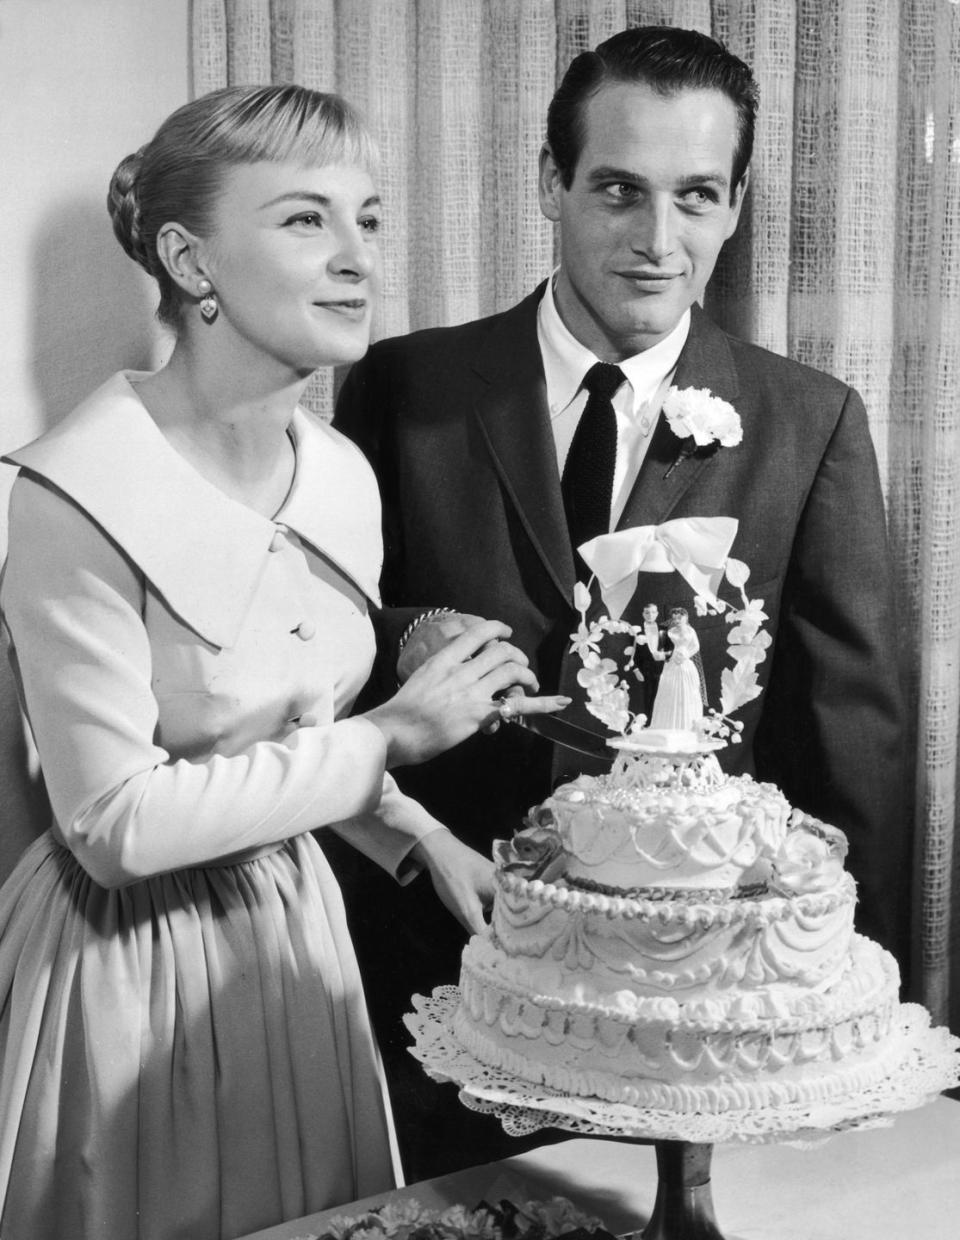 <p>After ending a previous 10-year marriage, Paul Newman, then 33, tied the knot with actress Joanne Woodward, 27, on January 29 in Las Vegas, Nevada. A romance between the two began when they costarred in <em>The Long, Hot Summer</em>. They remained together until he died in 2008.</p>